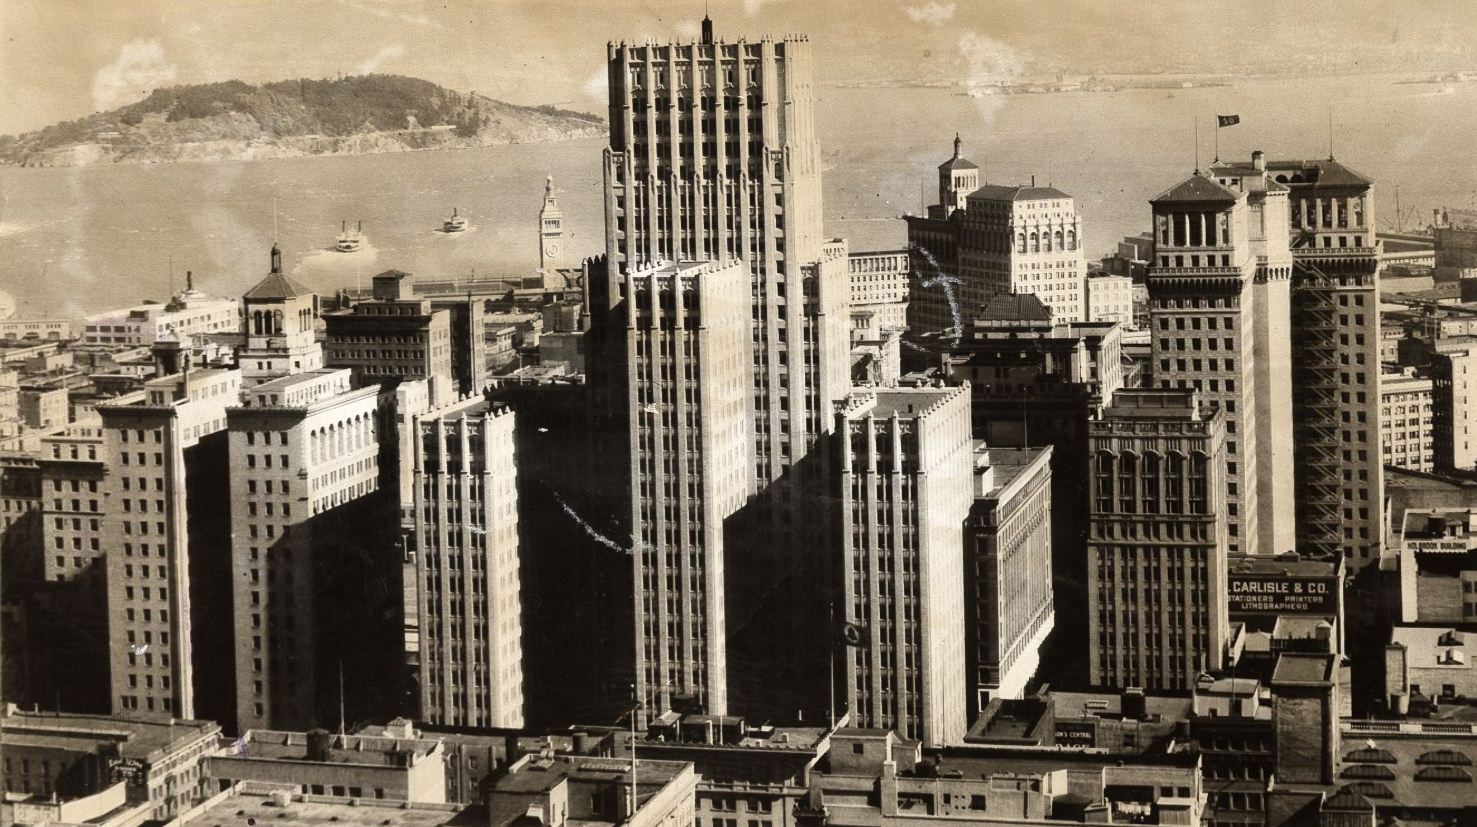 View of downtown skyline, 1930